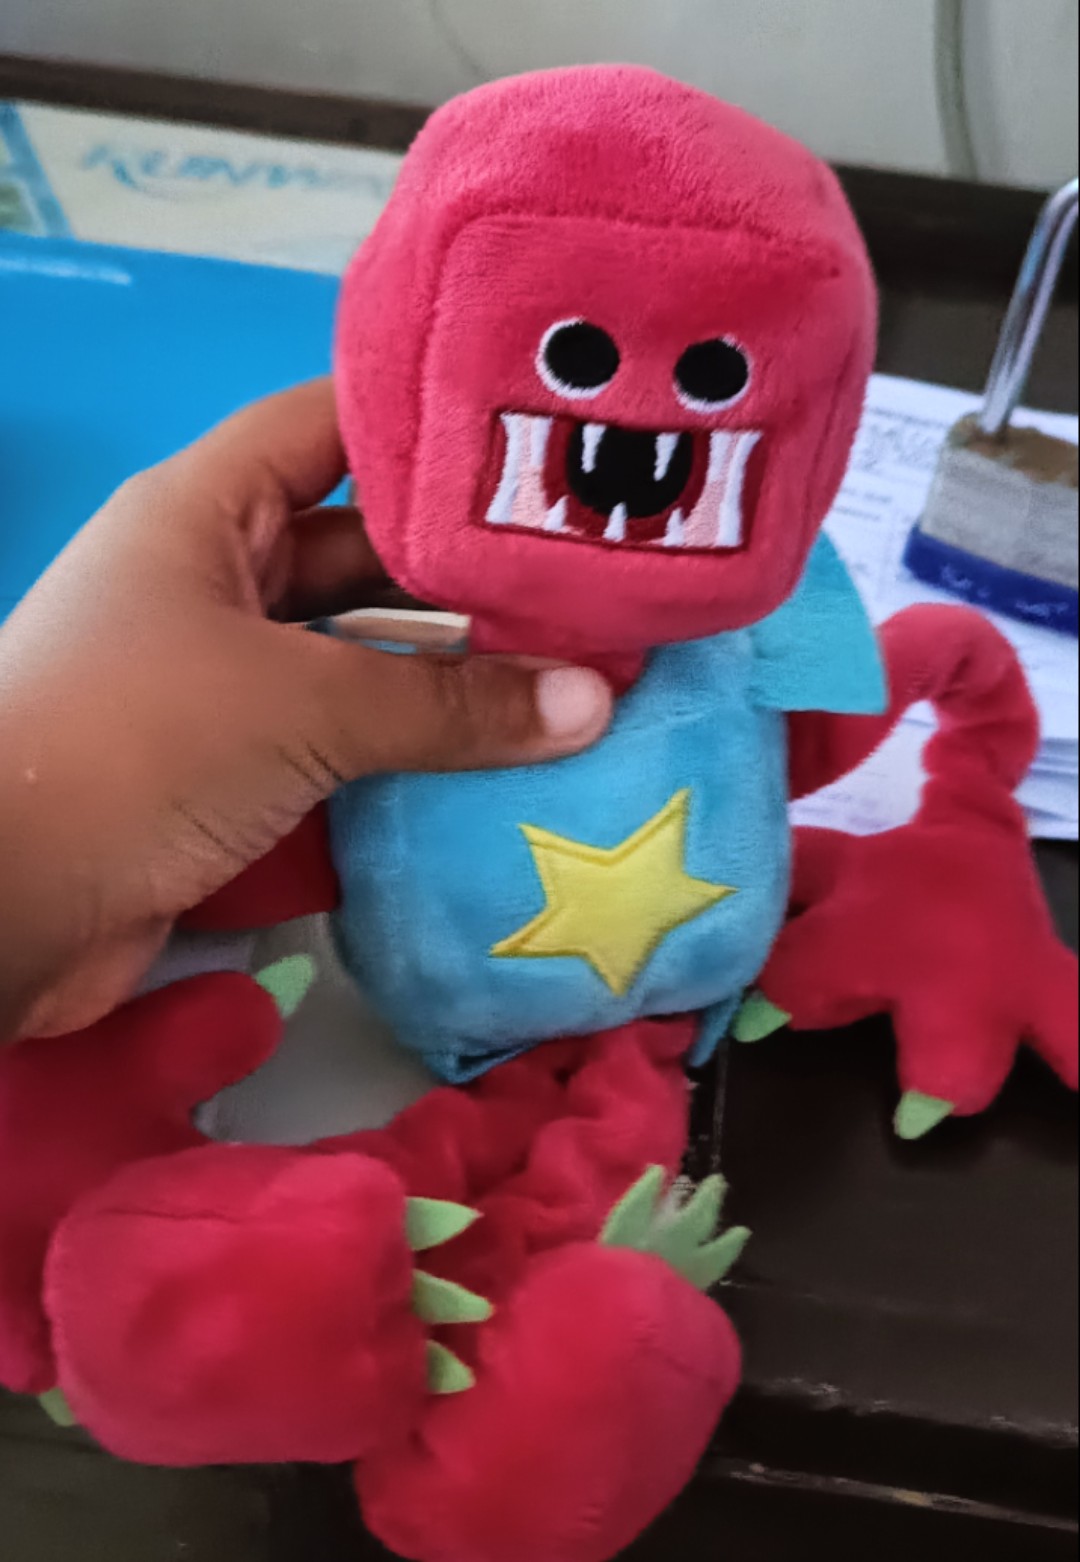 40cm Boxy Boo Brawl Stars Plush Wholesale From Manufacturers Perfect For  Cartoon Games, Film & TV Ideal Childrens Gift From Flowery888, $6.88